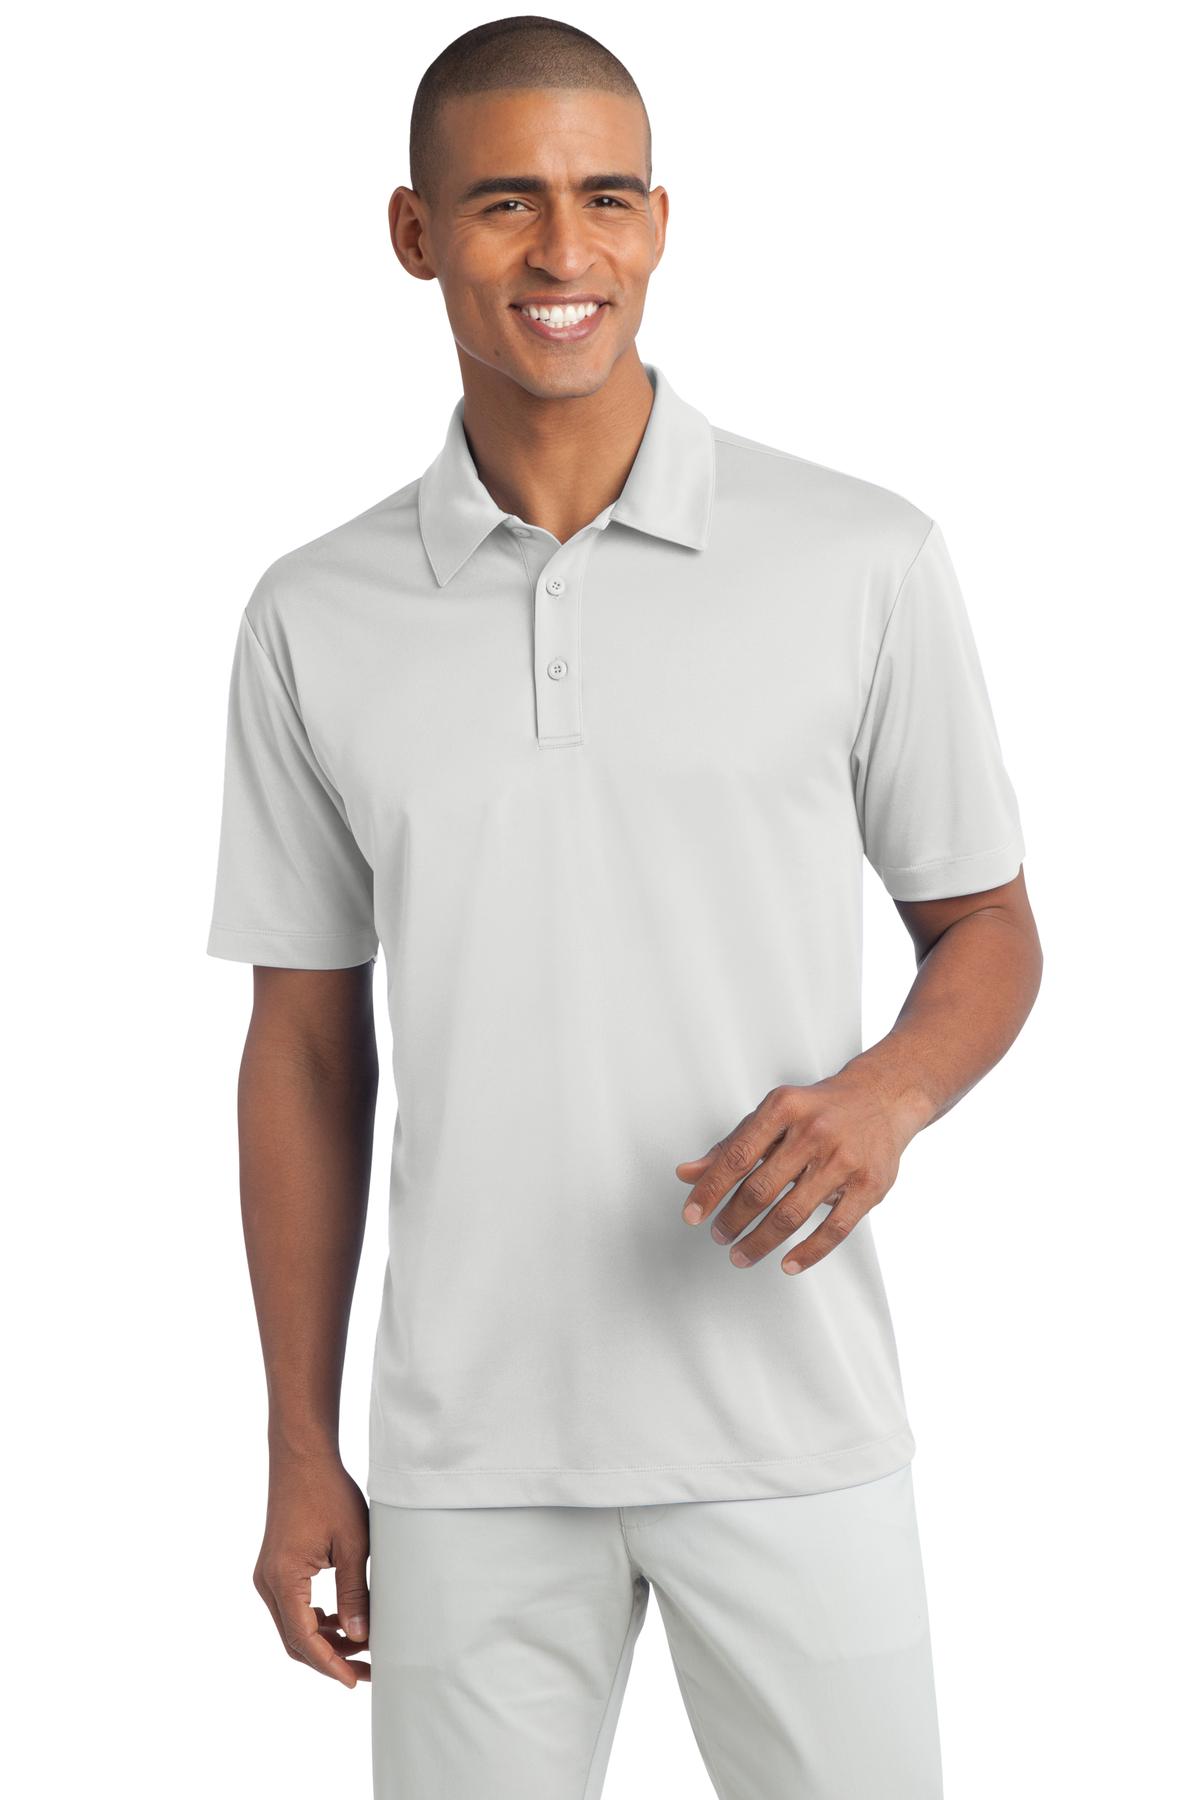 Port Authority - Silk Touch Performance Polo. K540